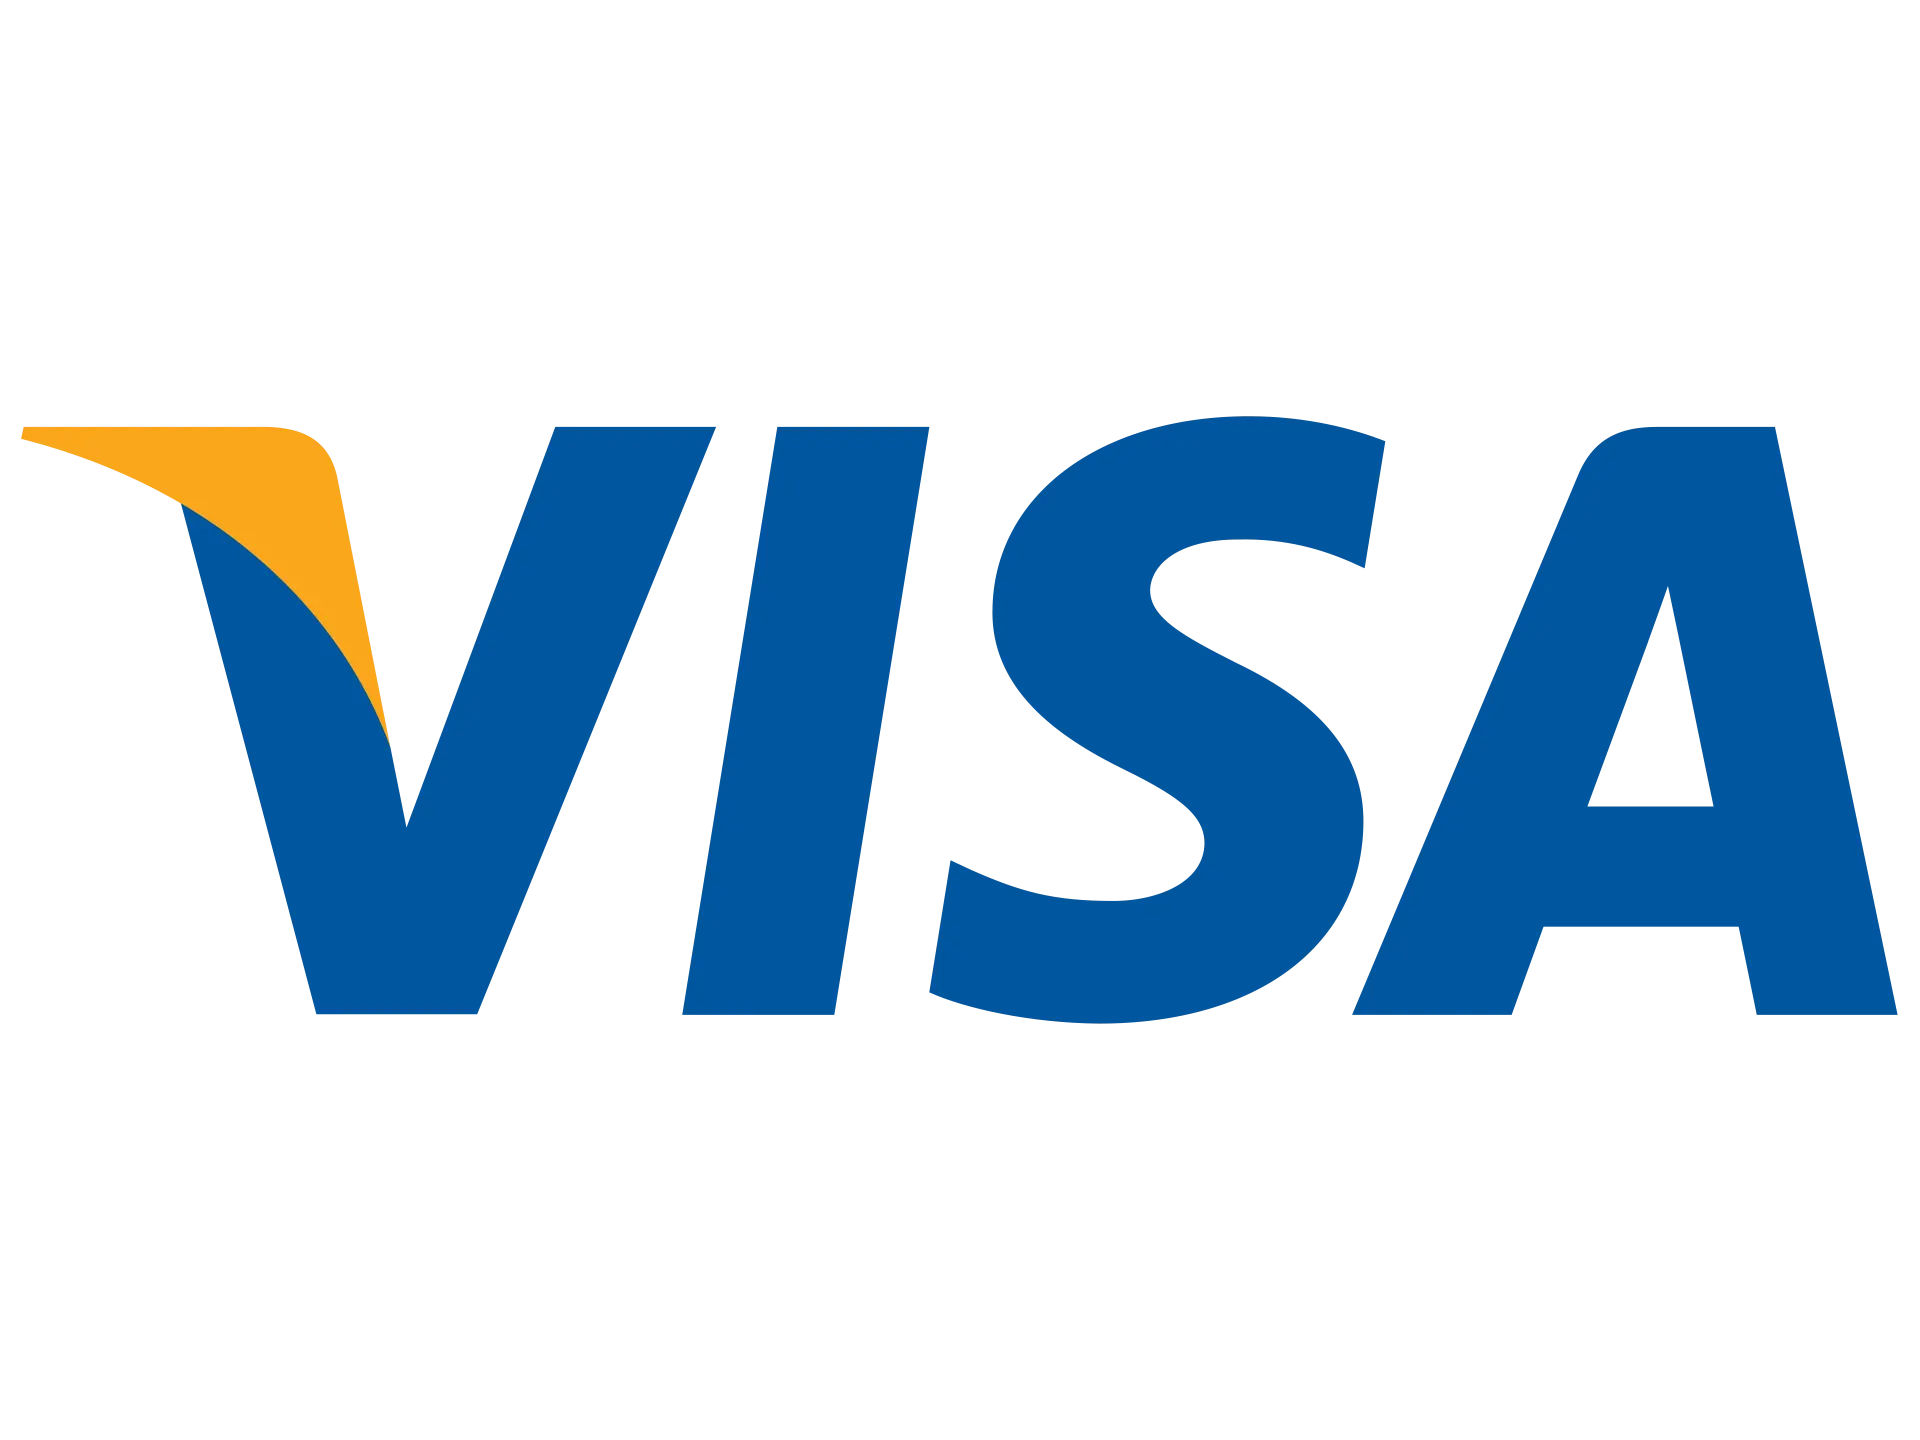 Visa, renowned in India, offers versatile payment with debit and credit cards, suitable for global travel.